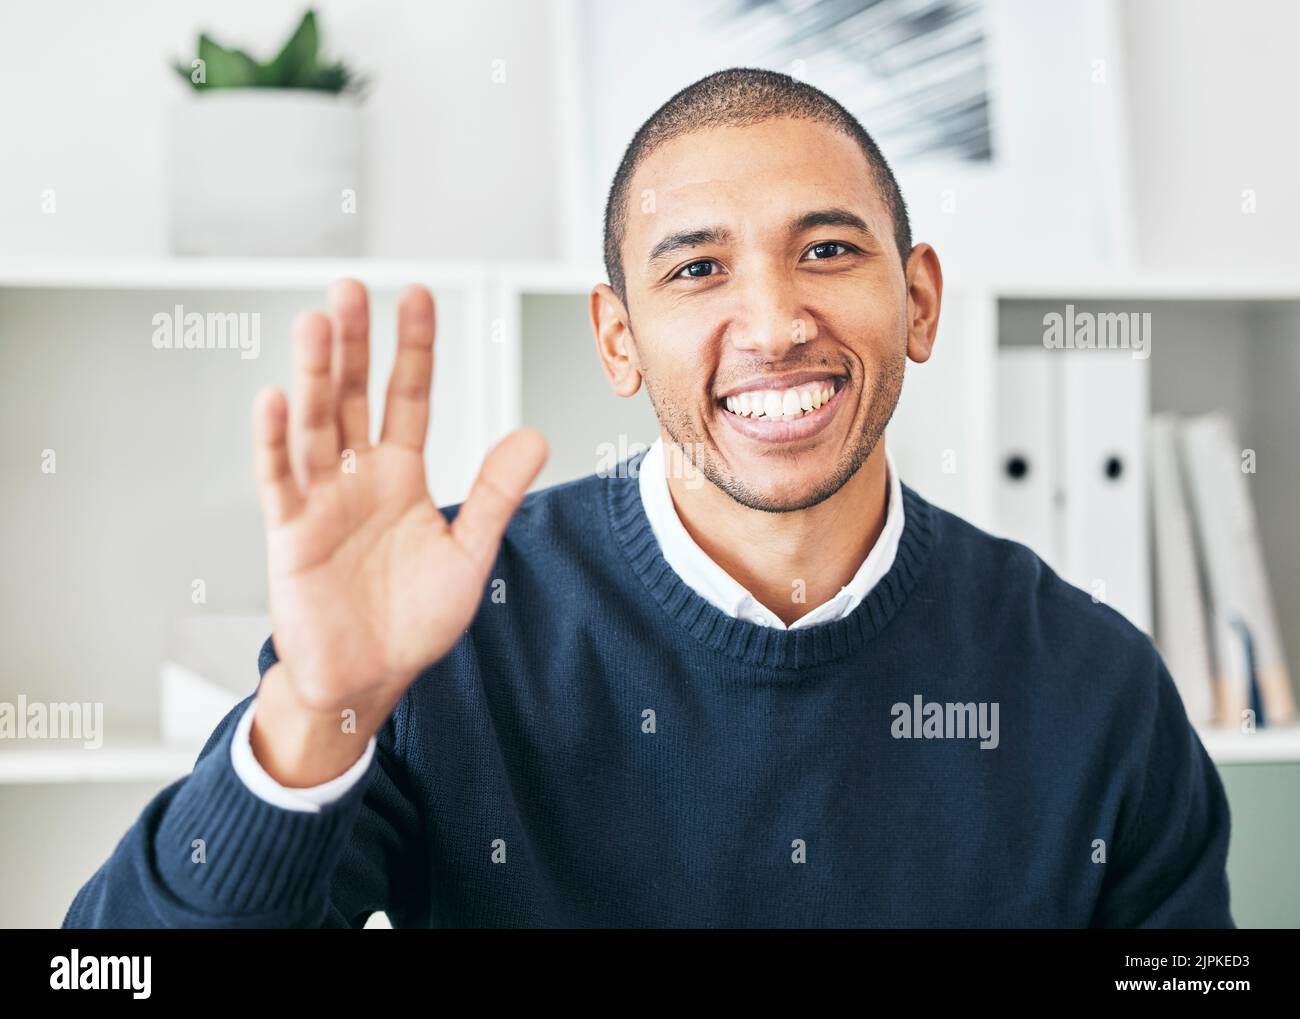 Waving, greeting and friendly employee with a bright smile and a positive mindset in the office. Portrait of a cheerful, joyful and excited Latino Stock Photo